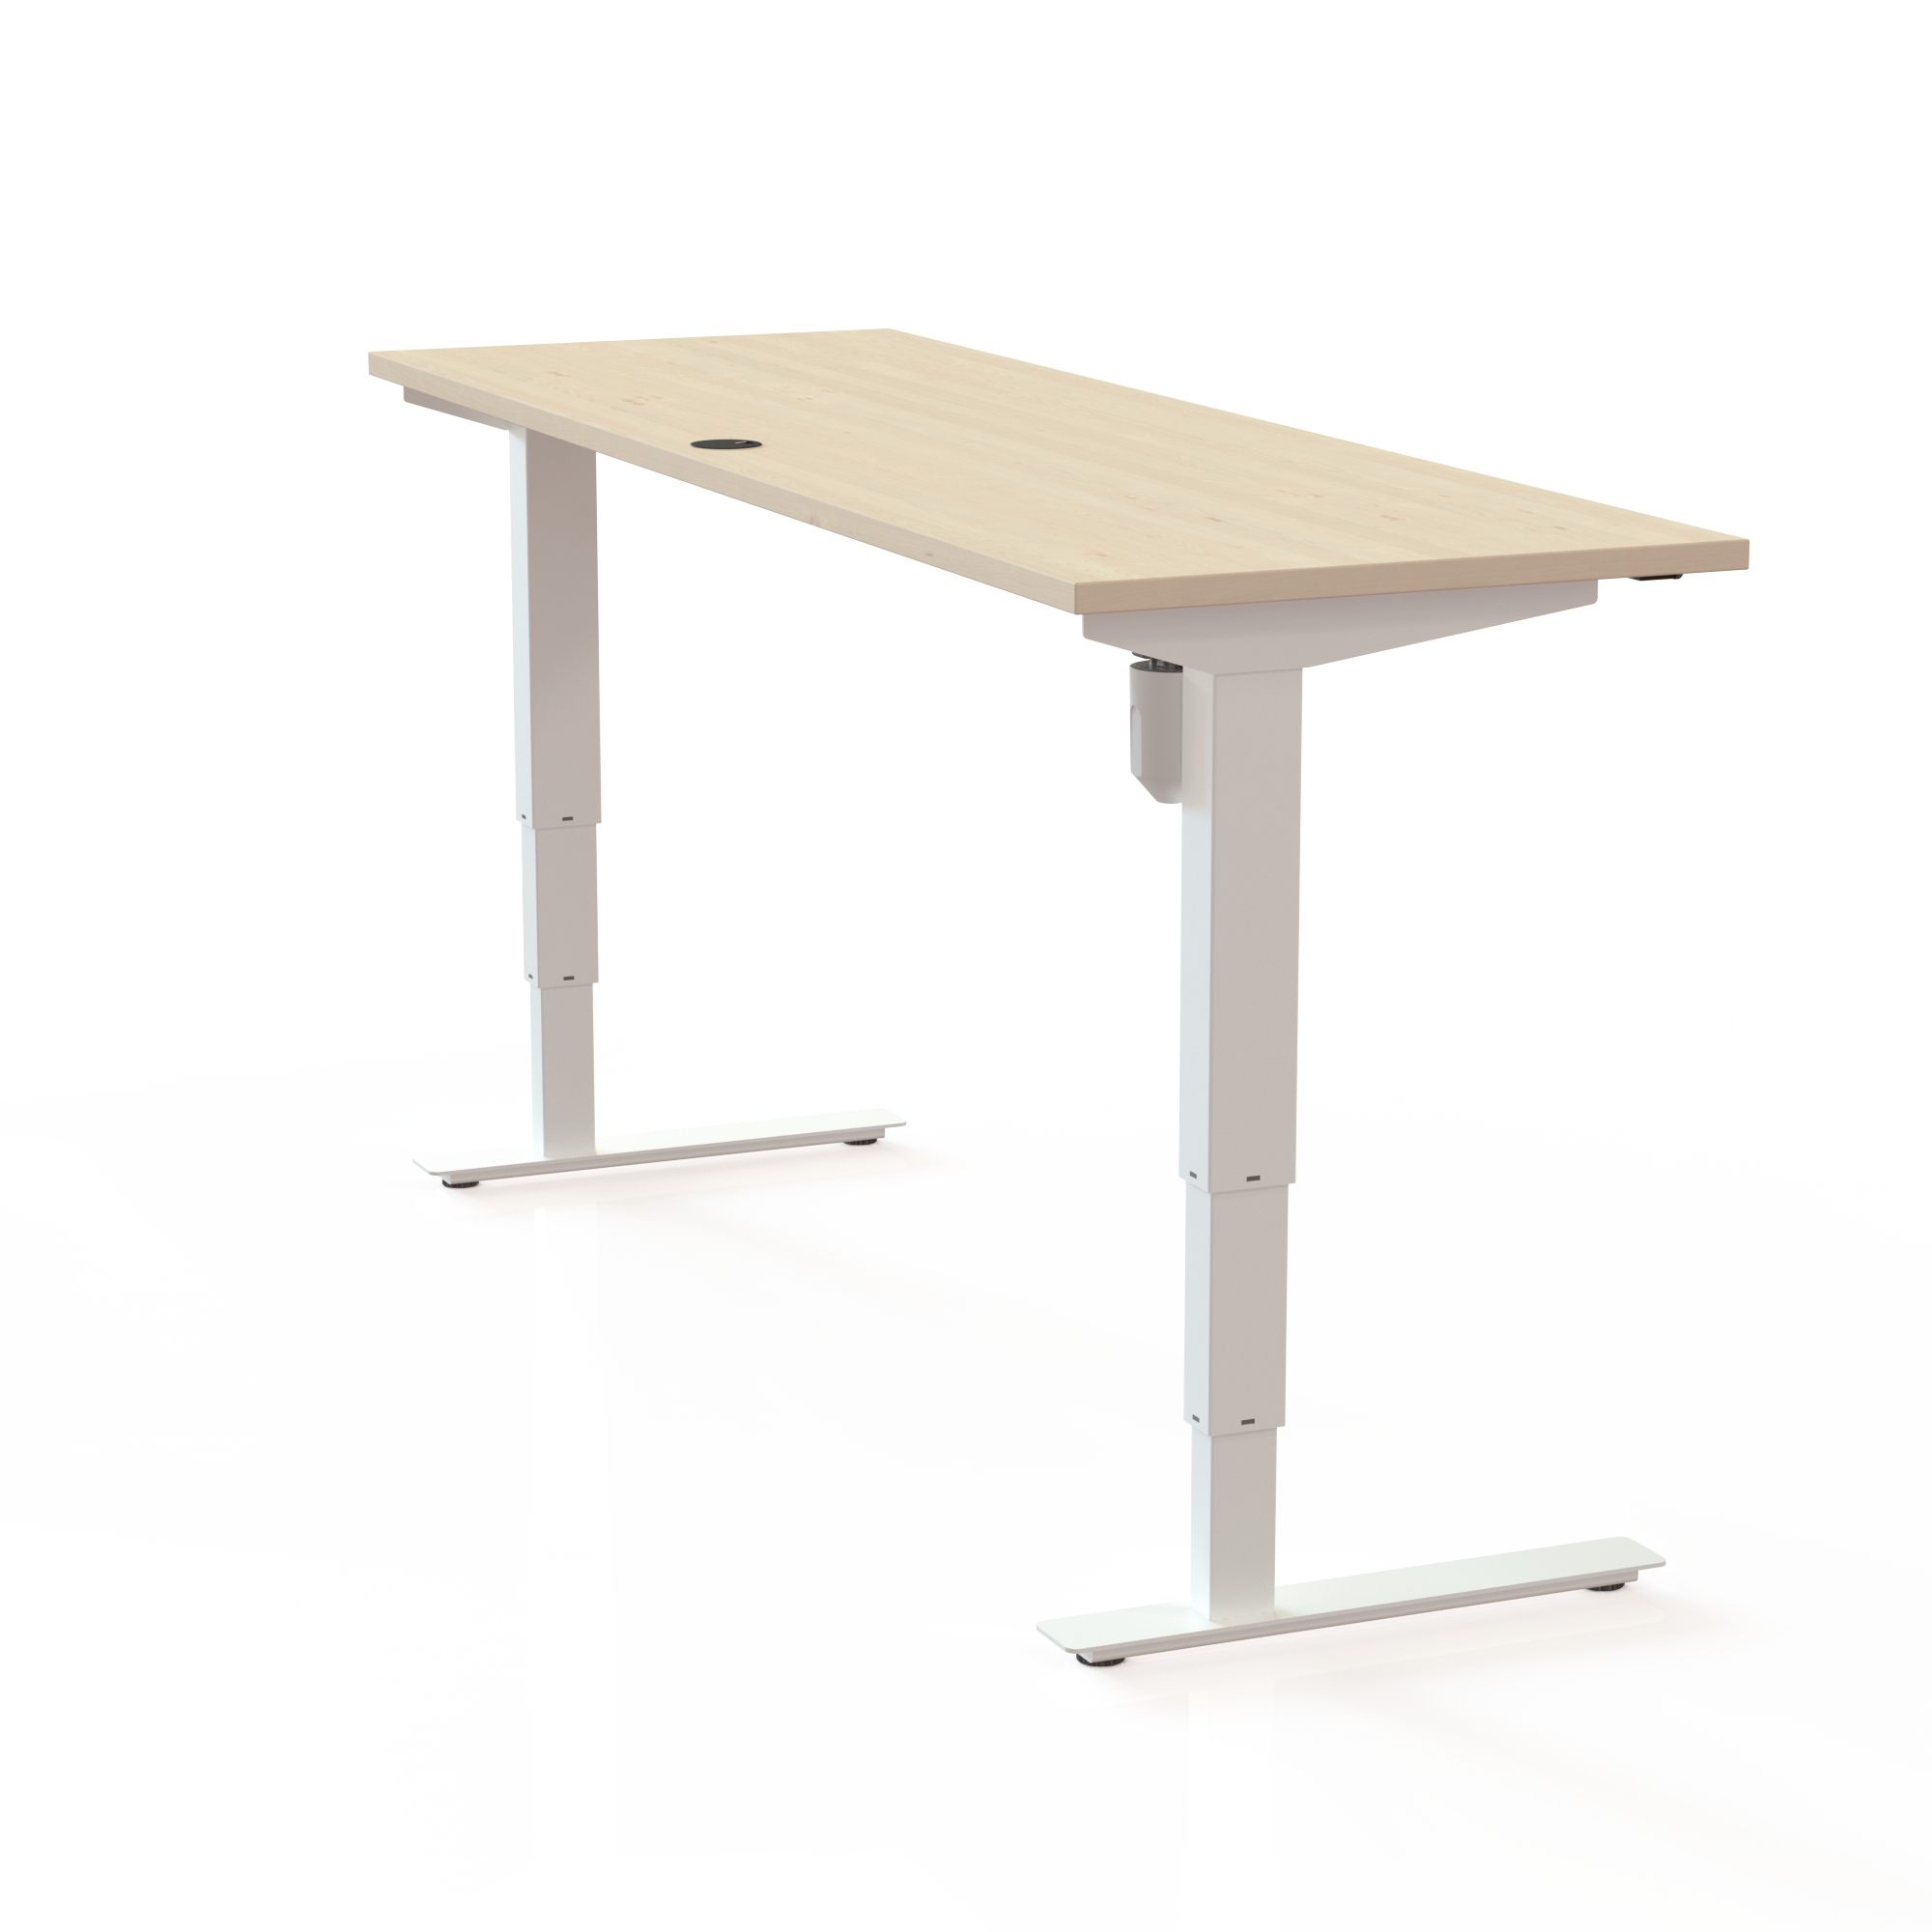 Electric Adjustable Desk | 180x60 cm | Maple with white frame